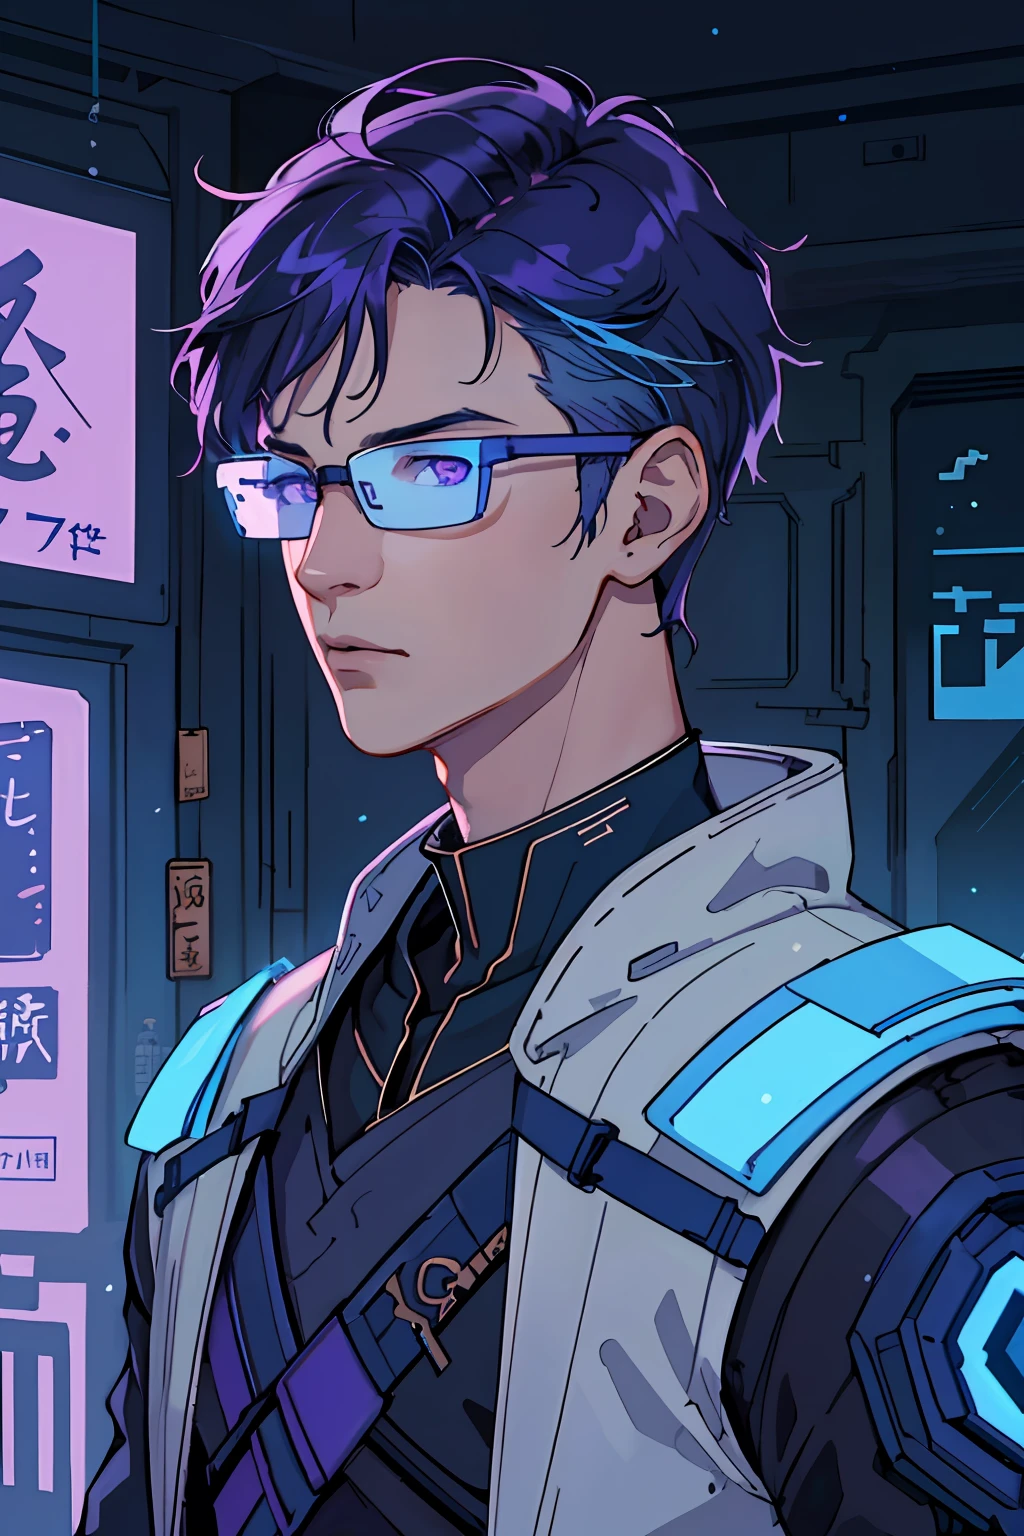 Antonio Moro, masterful, (1 male), (Half-body), tall young man, Skinny guy, ((male focus)), Guy, Short blue hair, disheveled hairstyle, Glasses Virtual Antennas, Glowing shades of purple and blue, pale skin tone, Spark's bright gray eyes, Particles, cyber punk, Future Man, gazing_at_Viewer, Reinforced purple suit, The device of small time on the wrist, solo, Standing, symmetric eyes, Subtle eyeshadow, Detailed face and eyes, dinamic lighting, Cinematic lighting, voluminous lighting, extra high resolution, cyber punk, The city of the future with bright neon lights, Cybernetic landscape, style of: ModelShooting, (Extremely detailed CG unity 8k wallpapers), professional majestic oil painting by Ed Blinkey, Etty Gailan, Studio Ghibli, by Jeremy Mann, Greg Manchess, Trending on Artstuion, trending on CGsociety, Intricate, high detail, sharp-focus, dramatic, Photorealistic painting of Midjourney and Greg Rutkowski.